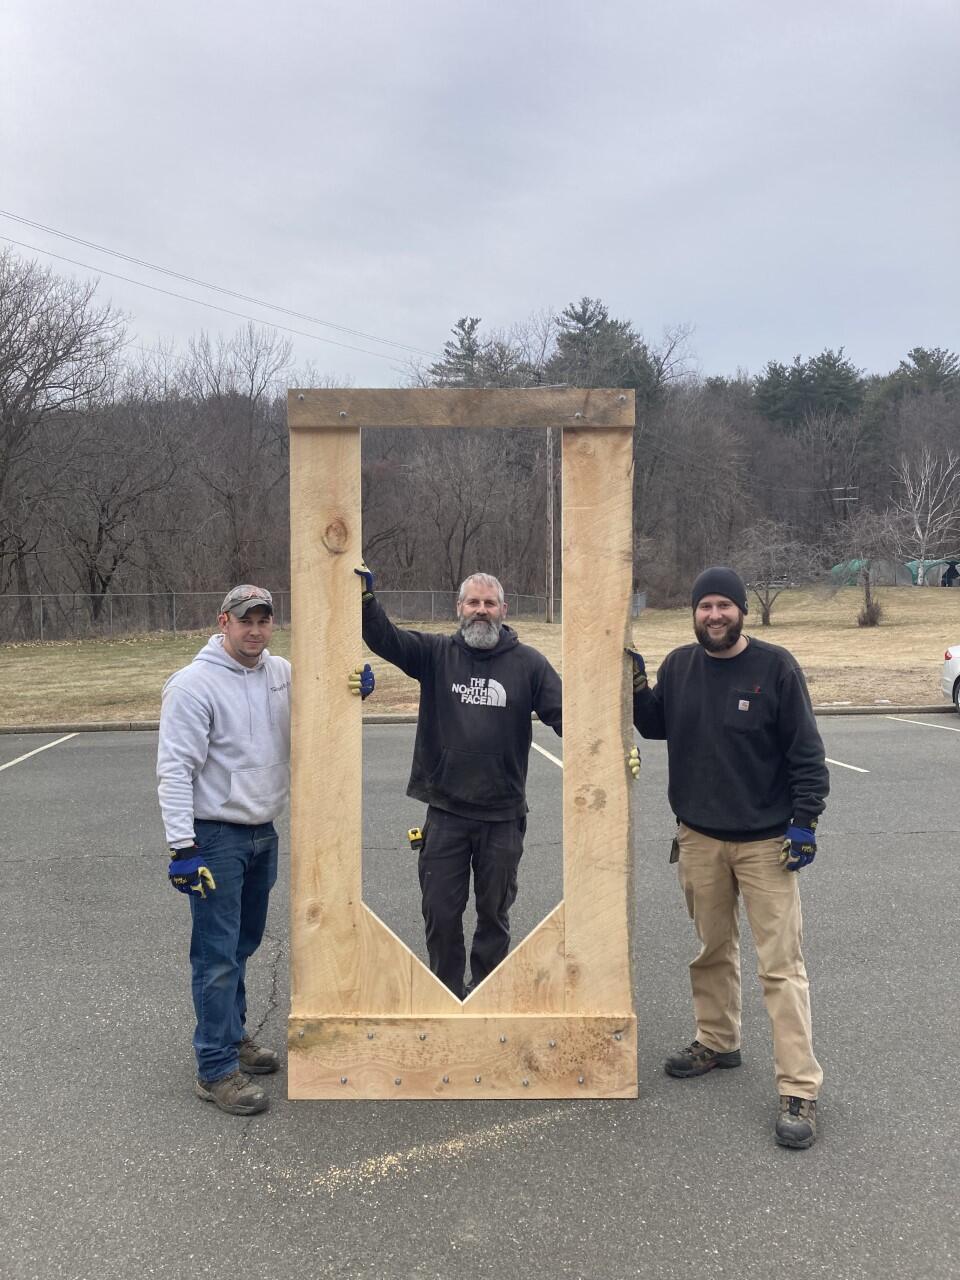 3 men hold a 9 foot tall wood frame upright in a parking lot